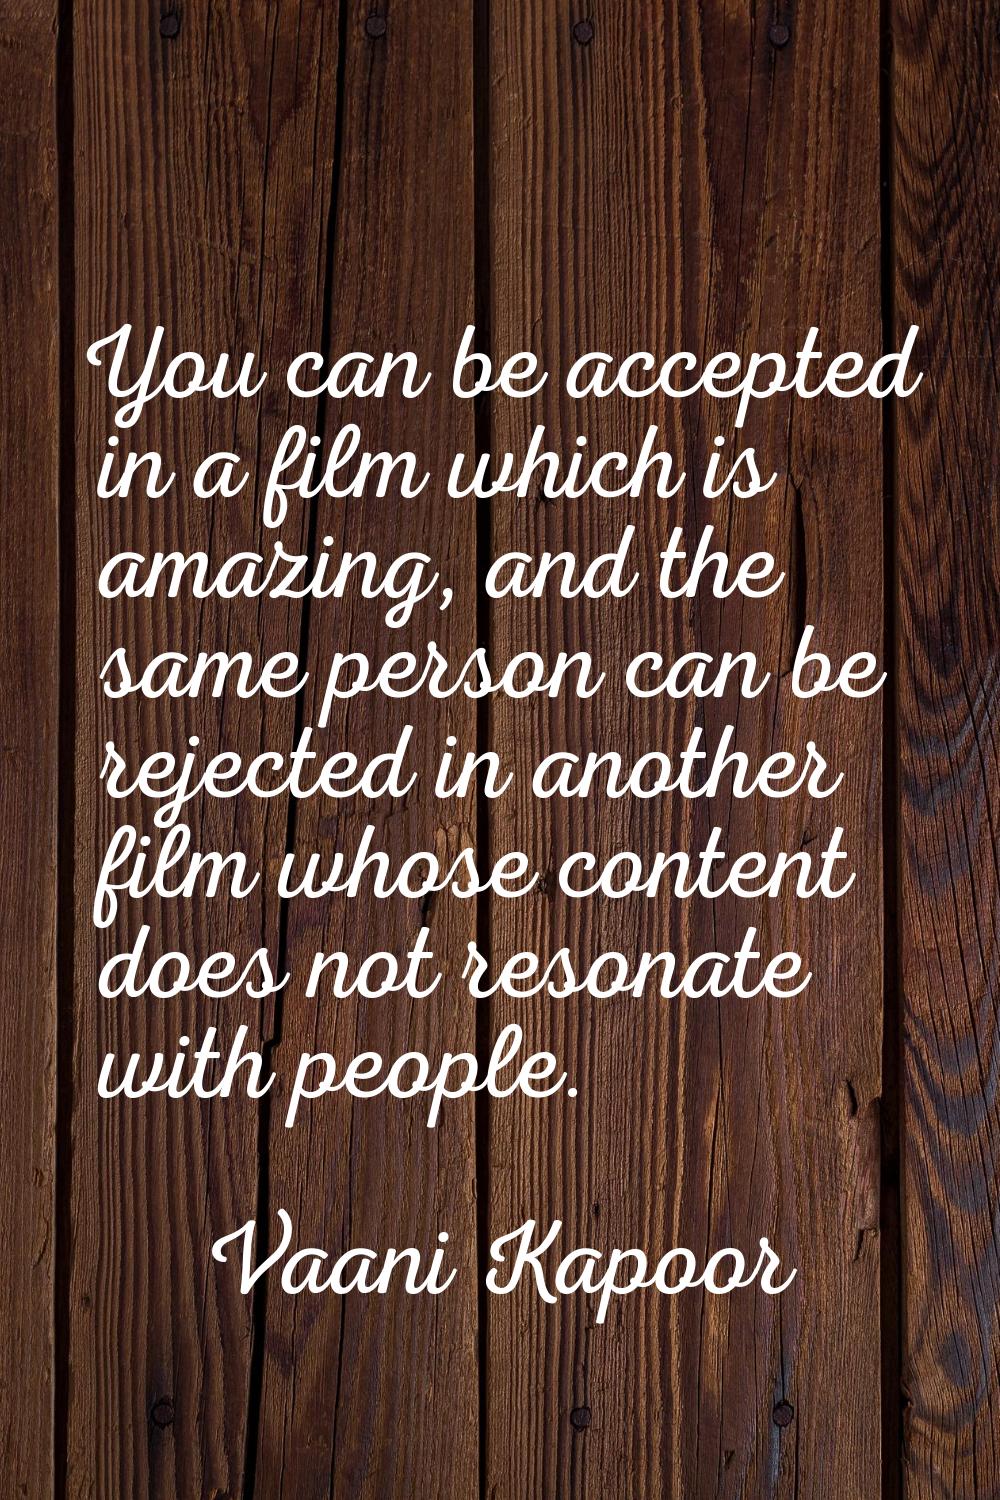 You can be accepted in a film which is amazing, and the same person can be rejected in another film